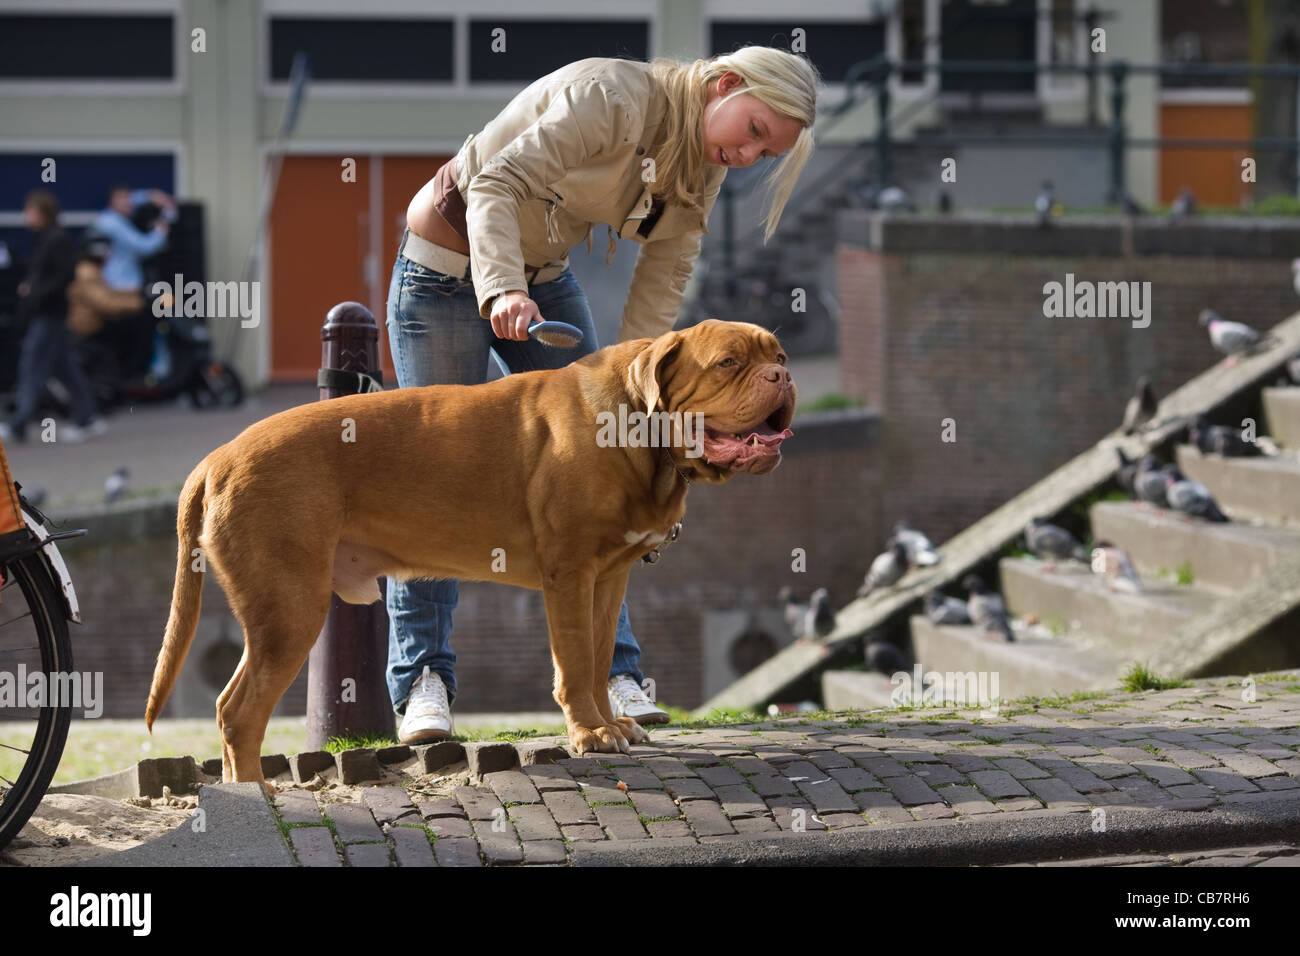 A young girl brushing her dog in the Singel, Amsterdam, The Netherlands Stock Photo